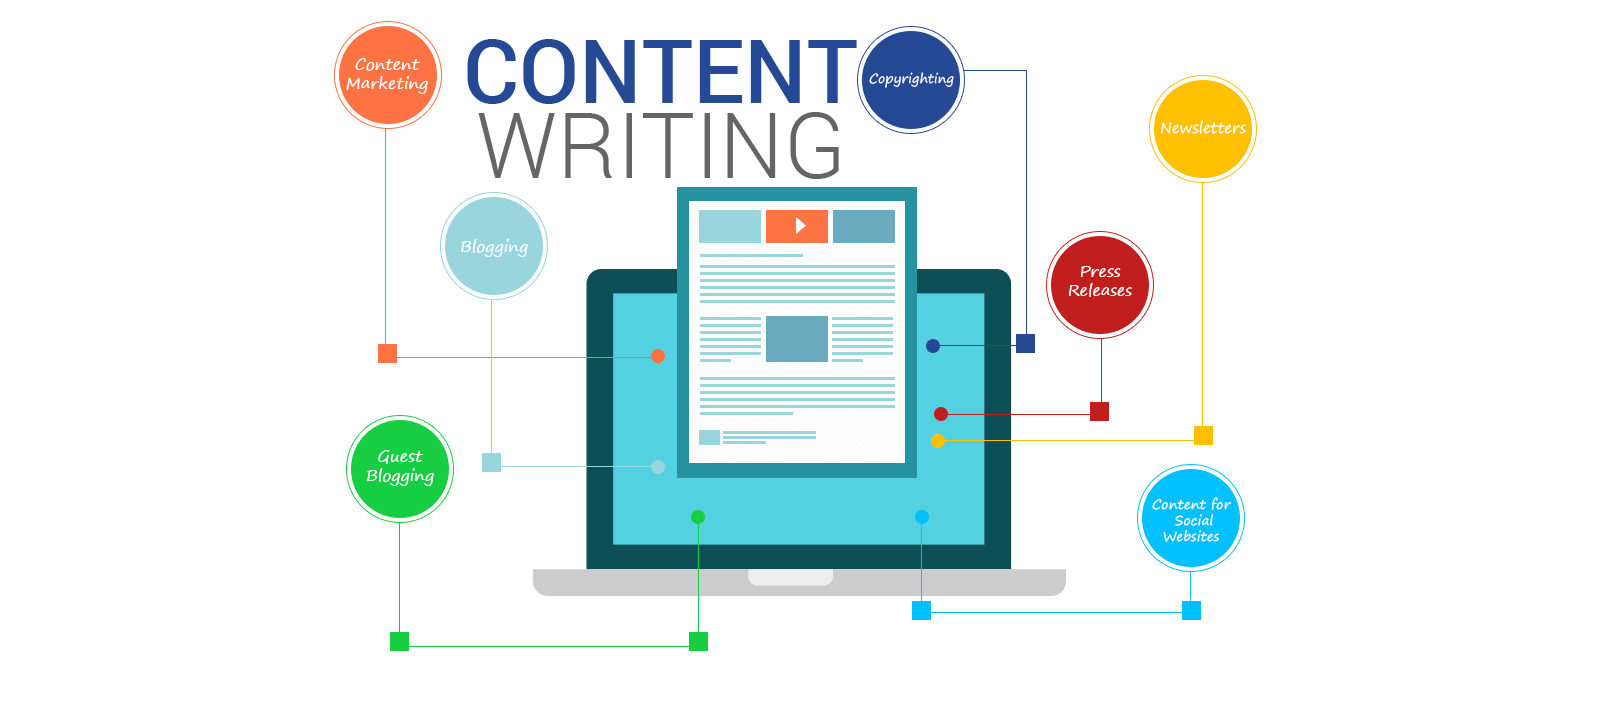 Content Writing Courses in Bangalore